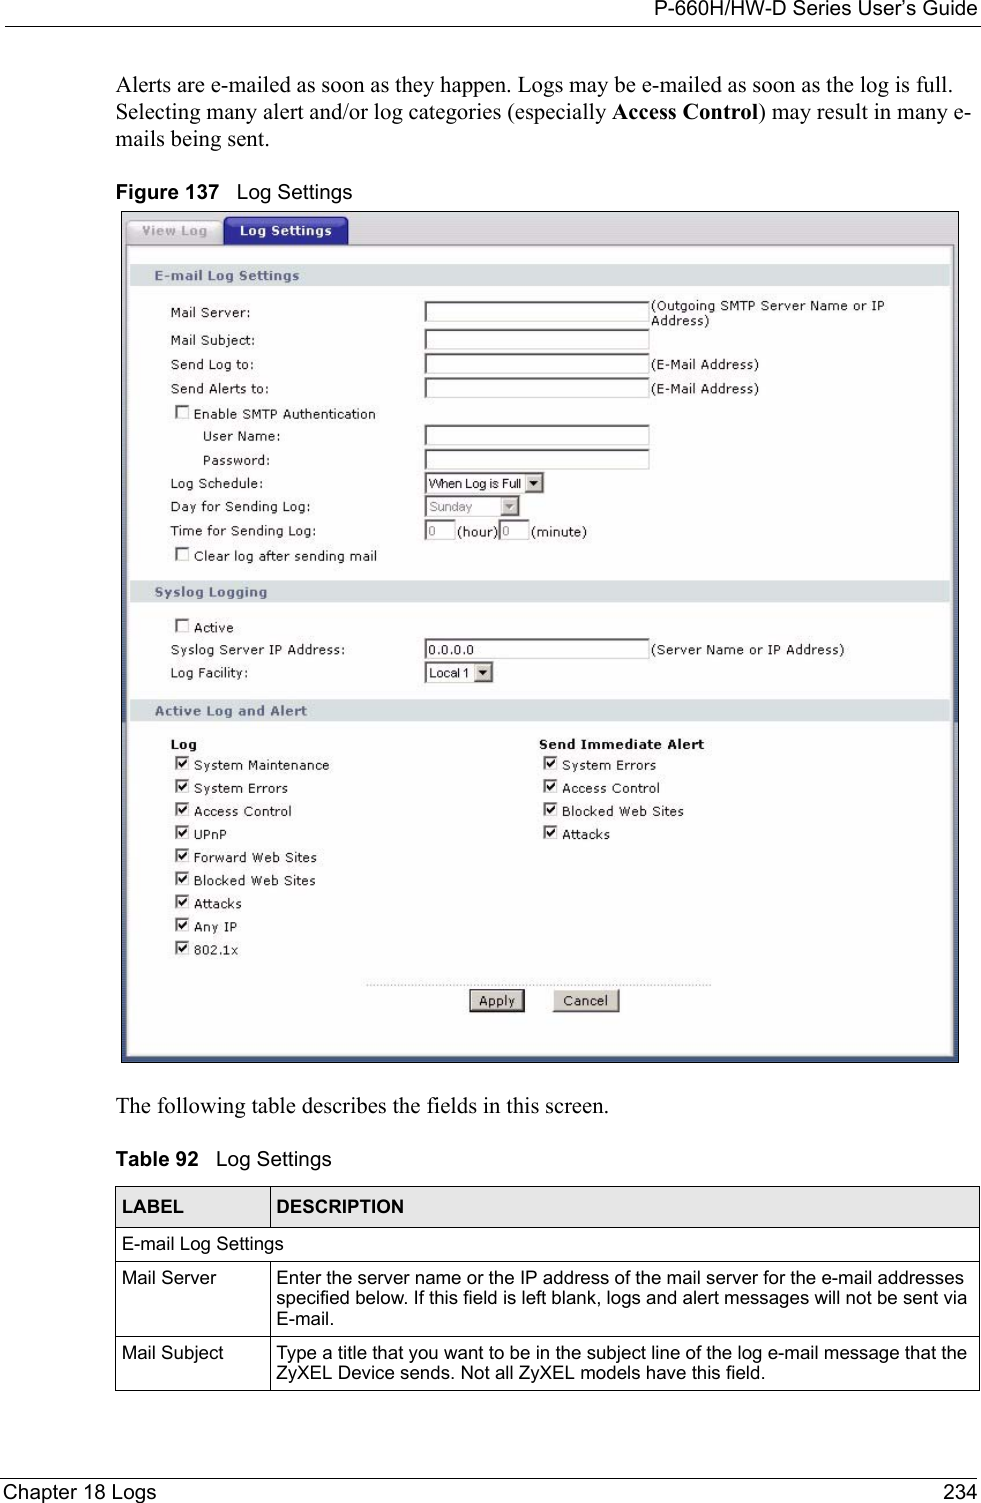 P-660H/HW-D Series User’s GuideChapter 18 Logs 234Alerts are e-mailed as soon as they happen. Logs may be e-mailed as soon as the log is full. Selecting many alert and/or log categories (especially Access Control) may result in many e-mails being sent.Figure 137   Log SettingsThe following table describes the fields in this screen.Table 92   Log SettingsLABEL DESCRIPTIONE-mail Log SettingsMail Server  Enter the server name or the IP address of the mail server for the e-mail addresses specified below. If this field is left blank, logs and alert messages will not be sent via E-mail. Mail Subject Type a title that you want to be in the subject line of the log e-mail message that the ZyXEL Device sends. Not all ZyXEL models have this field.